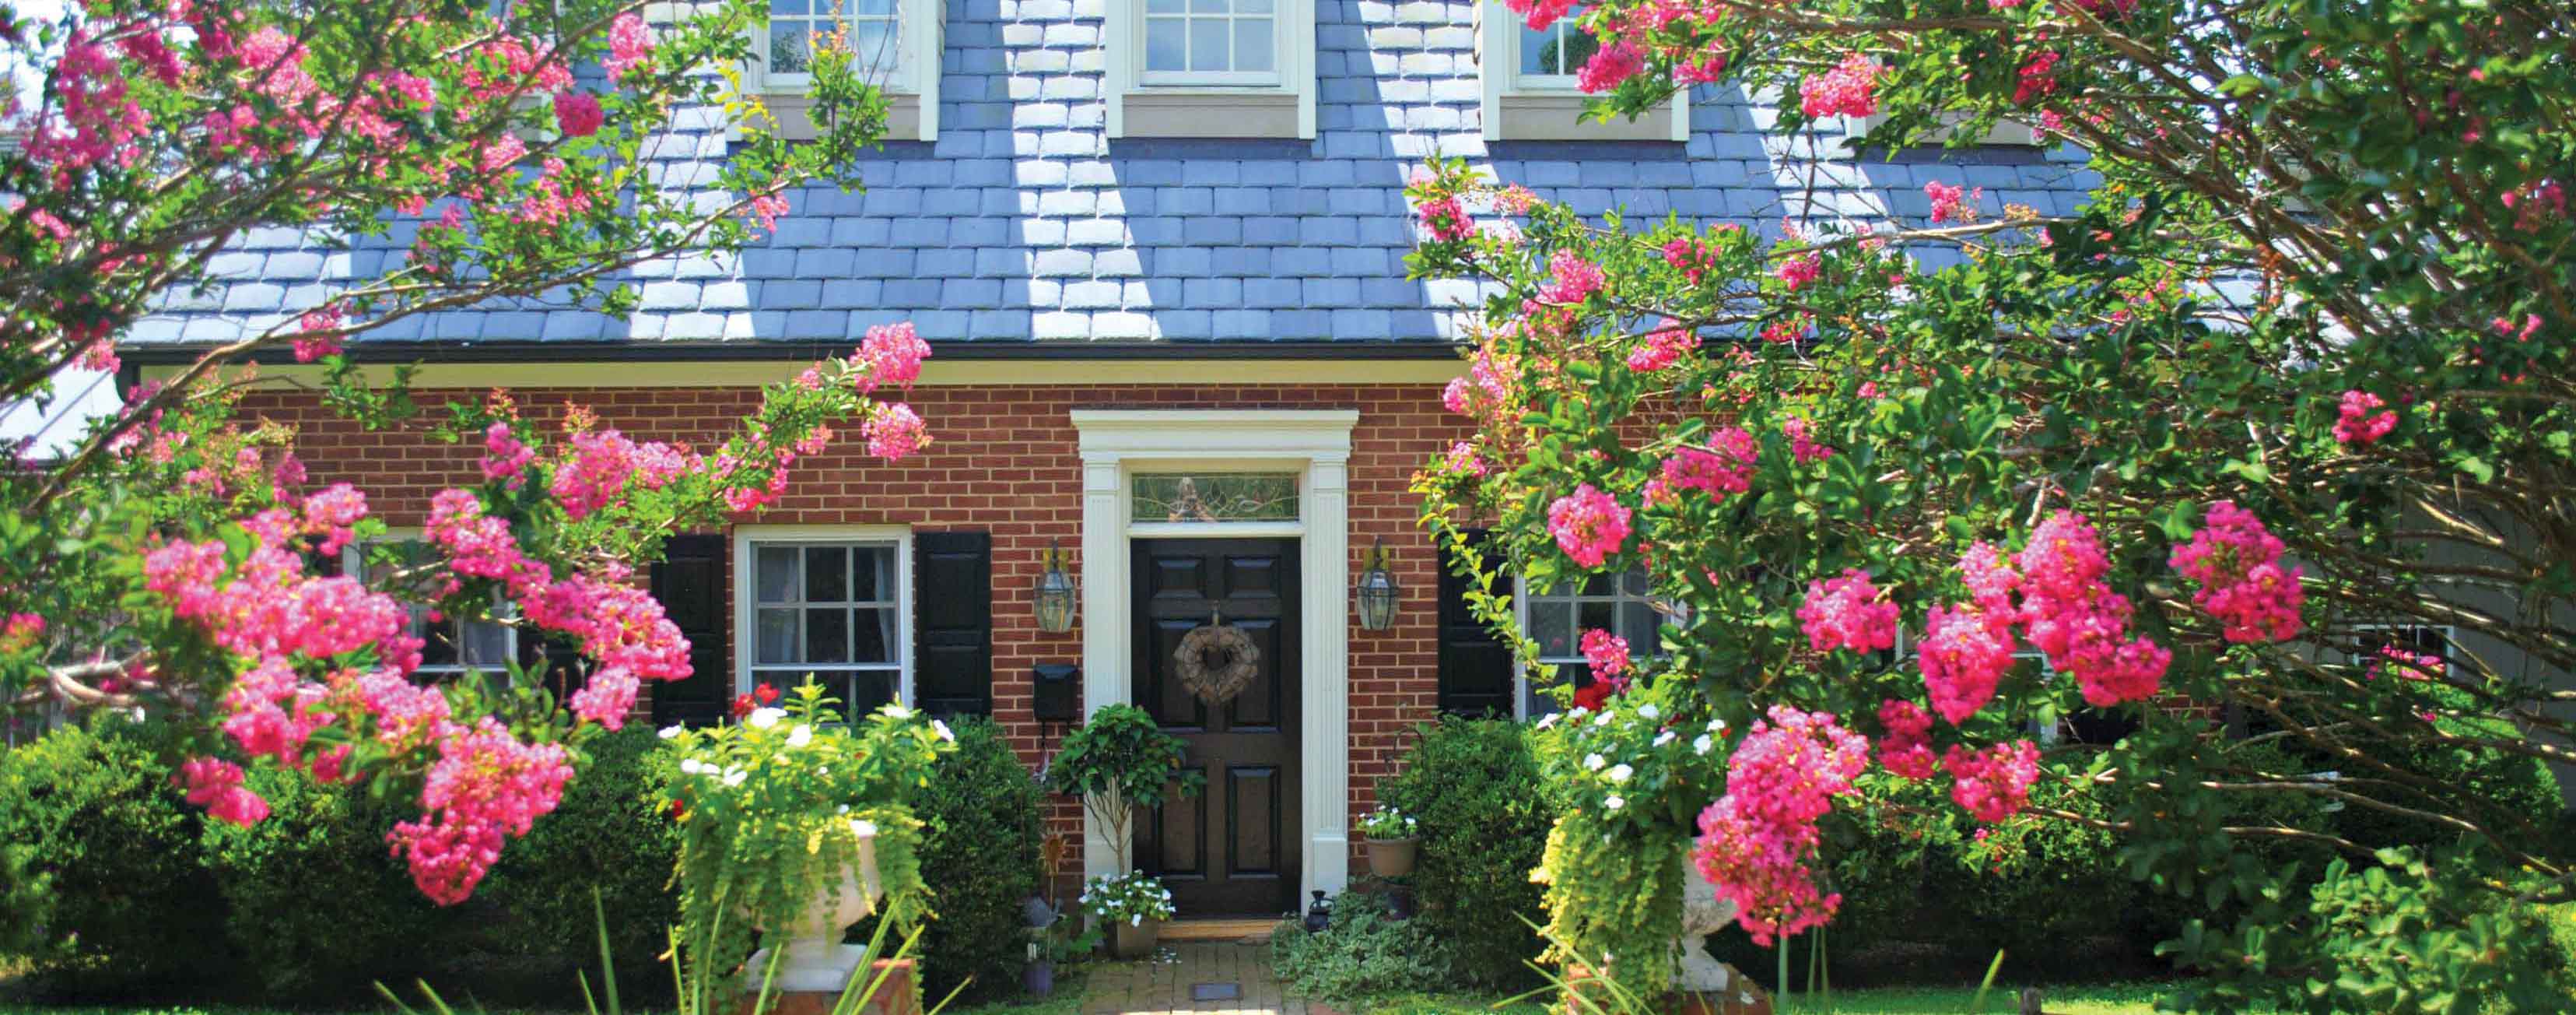 Charming cottage with roses